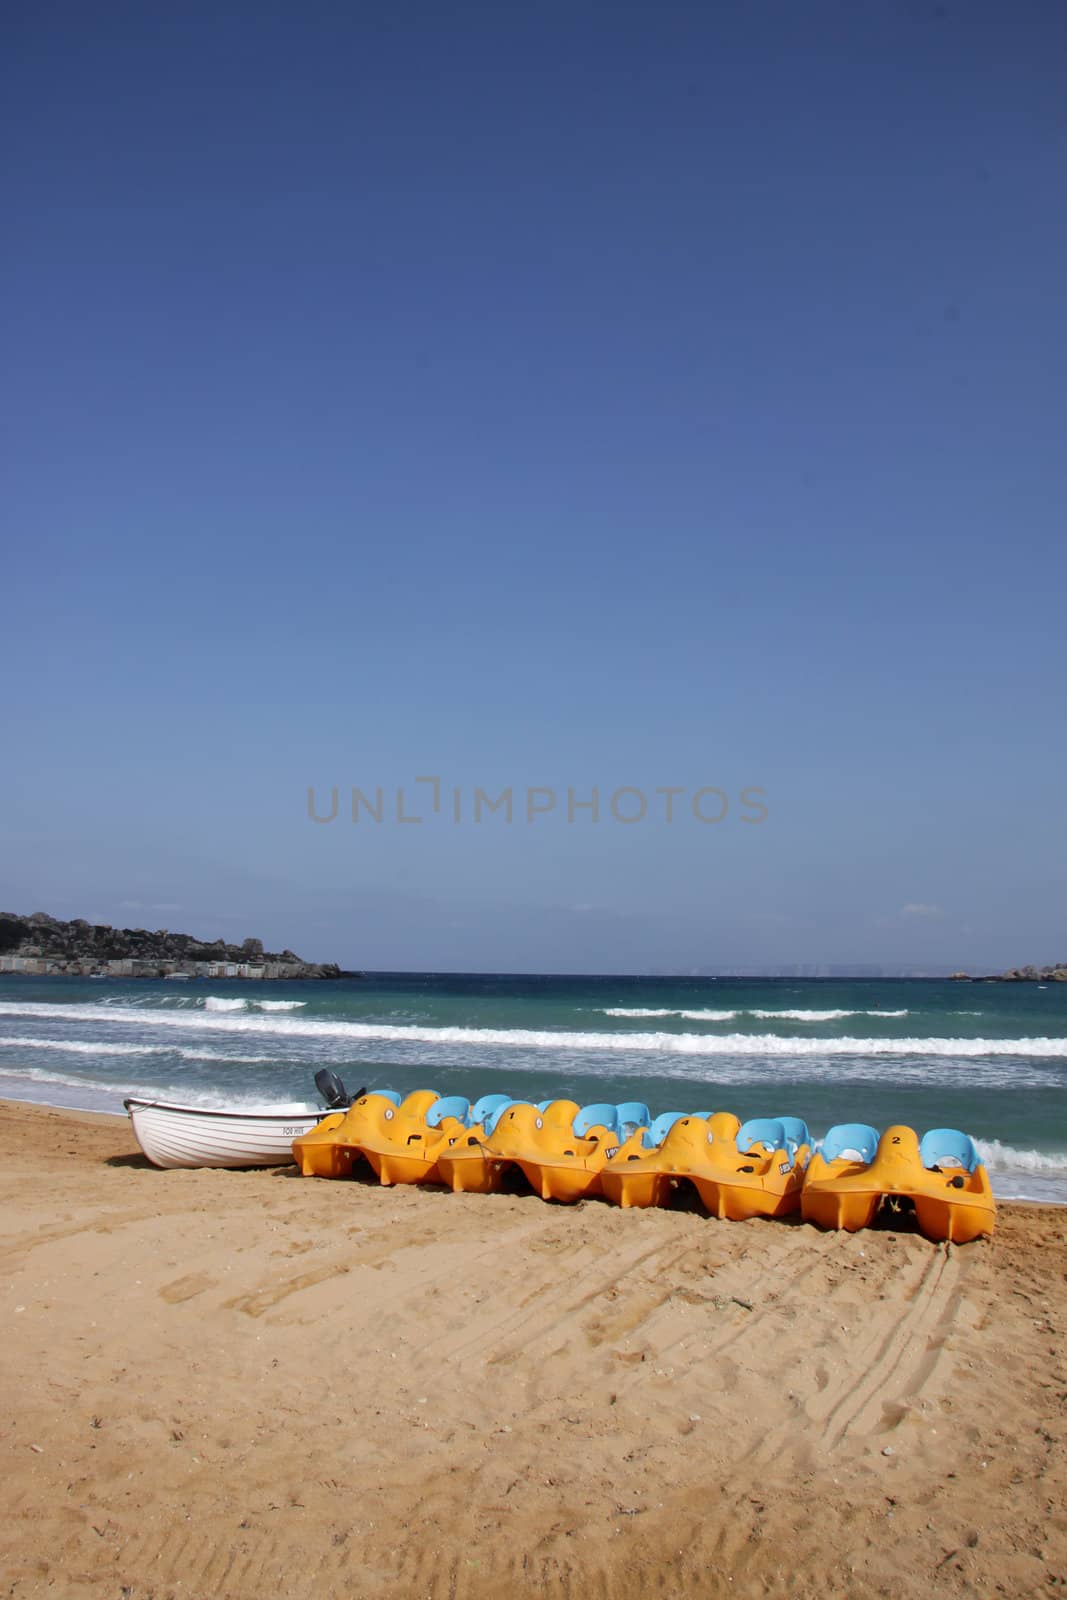 A row of peddle boats on the beach on the island of Malta, Europe